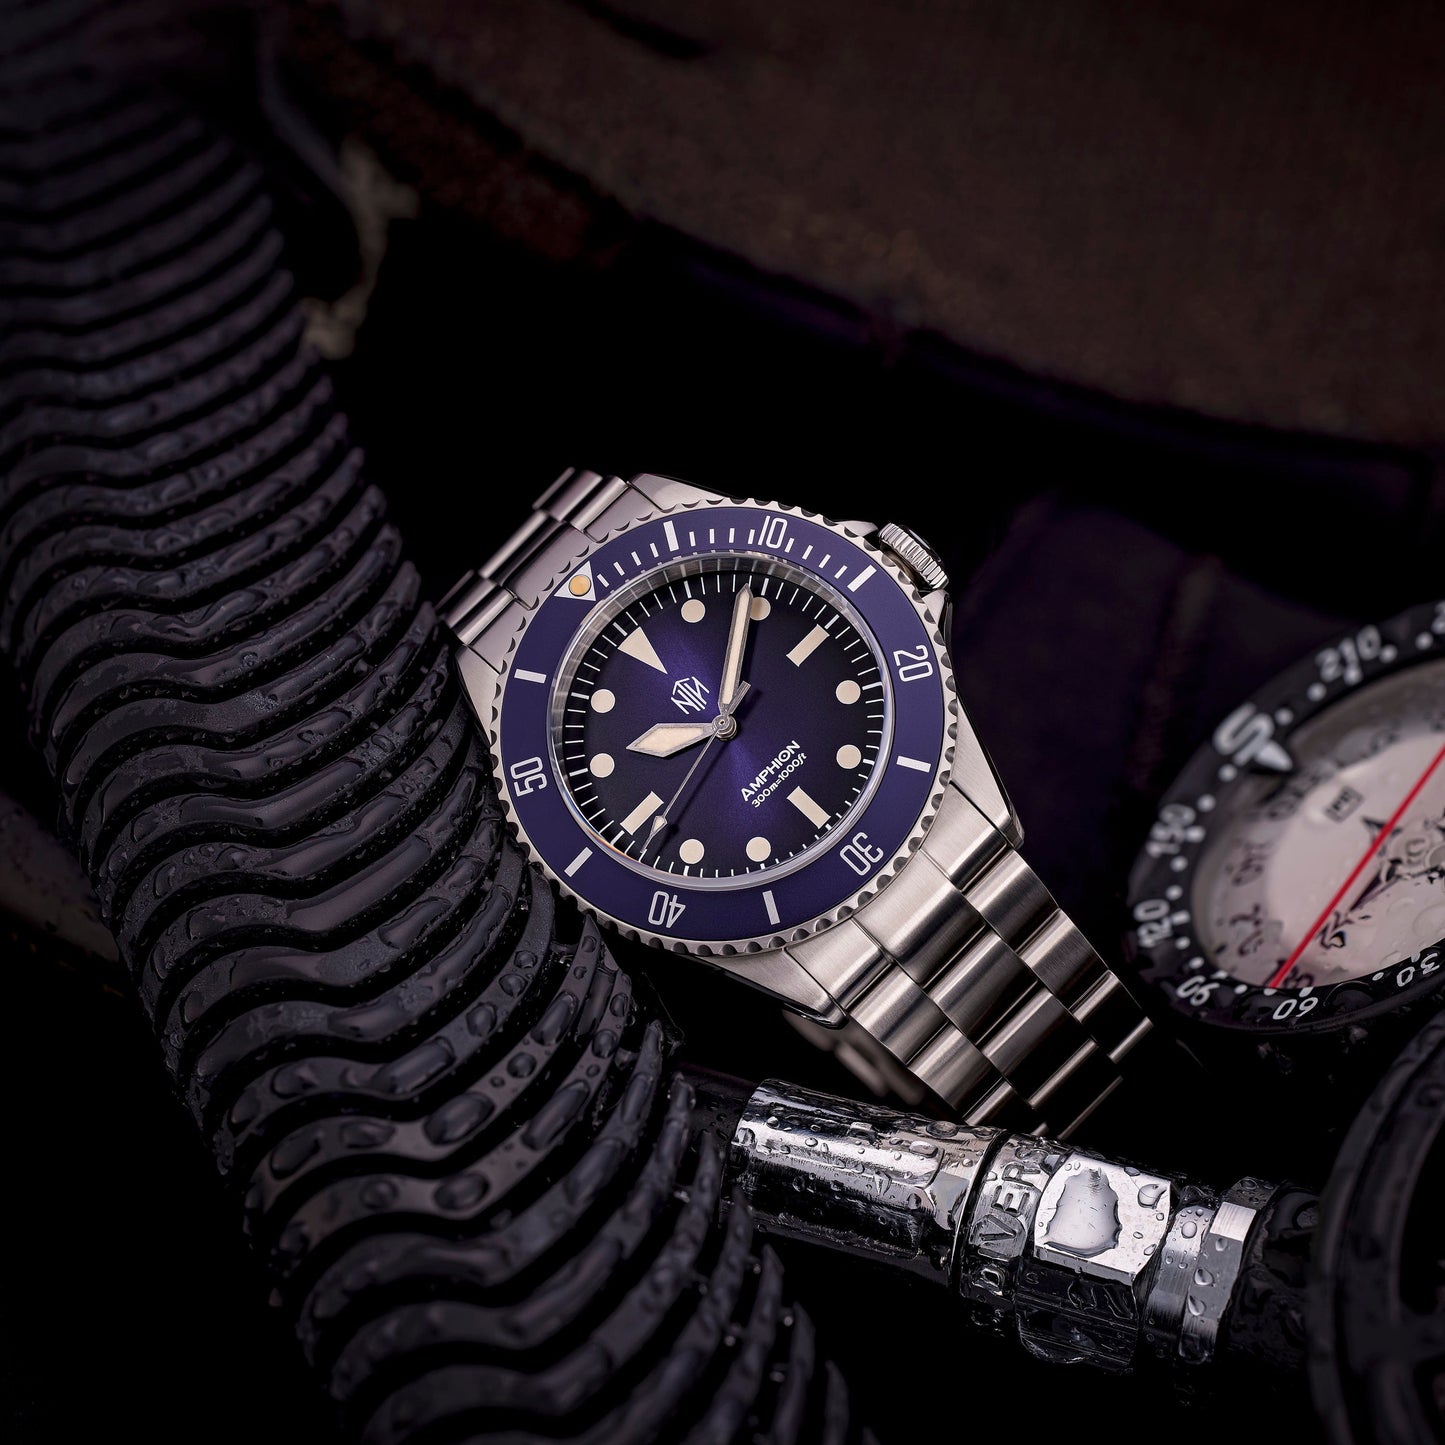 NTH Amphion Midnight Blue With Date - 3 Link Bracelet